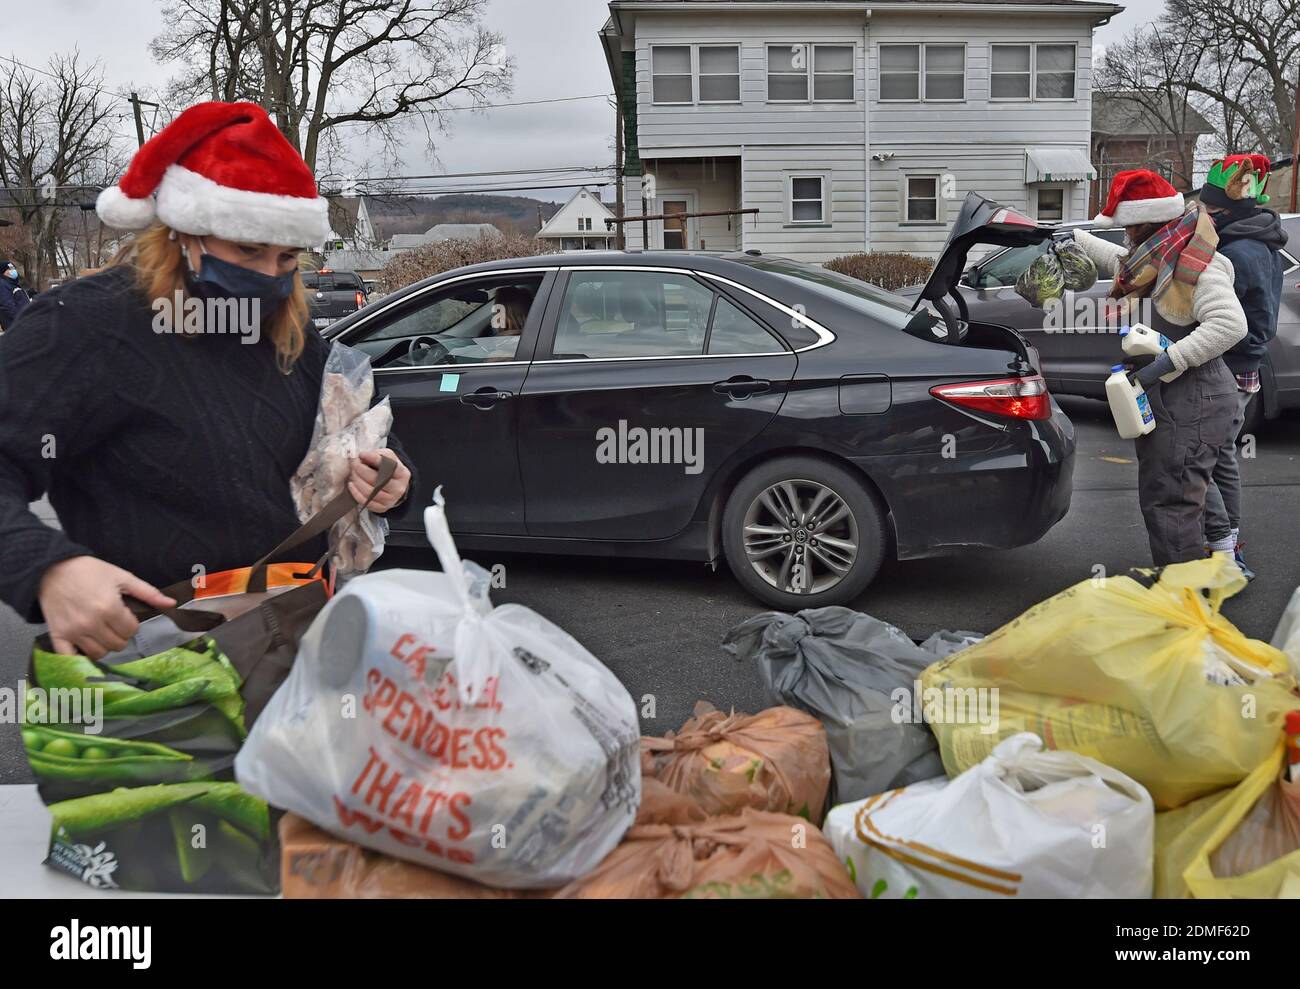 Kingston, United States. 16th Dec, 2020. Volunteers fill cars with food at a drive thru food bank.Since the start of Covid the Al Beech food pantry has been very busy, today they served there one millionth guest. For Christmas volunteers wore Santa hats and handed out gift cards, candy and balloons along with the regular food goods. Credit: SOPA Images Limited/Alamy Live News Stock Photo